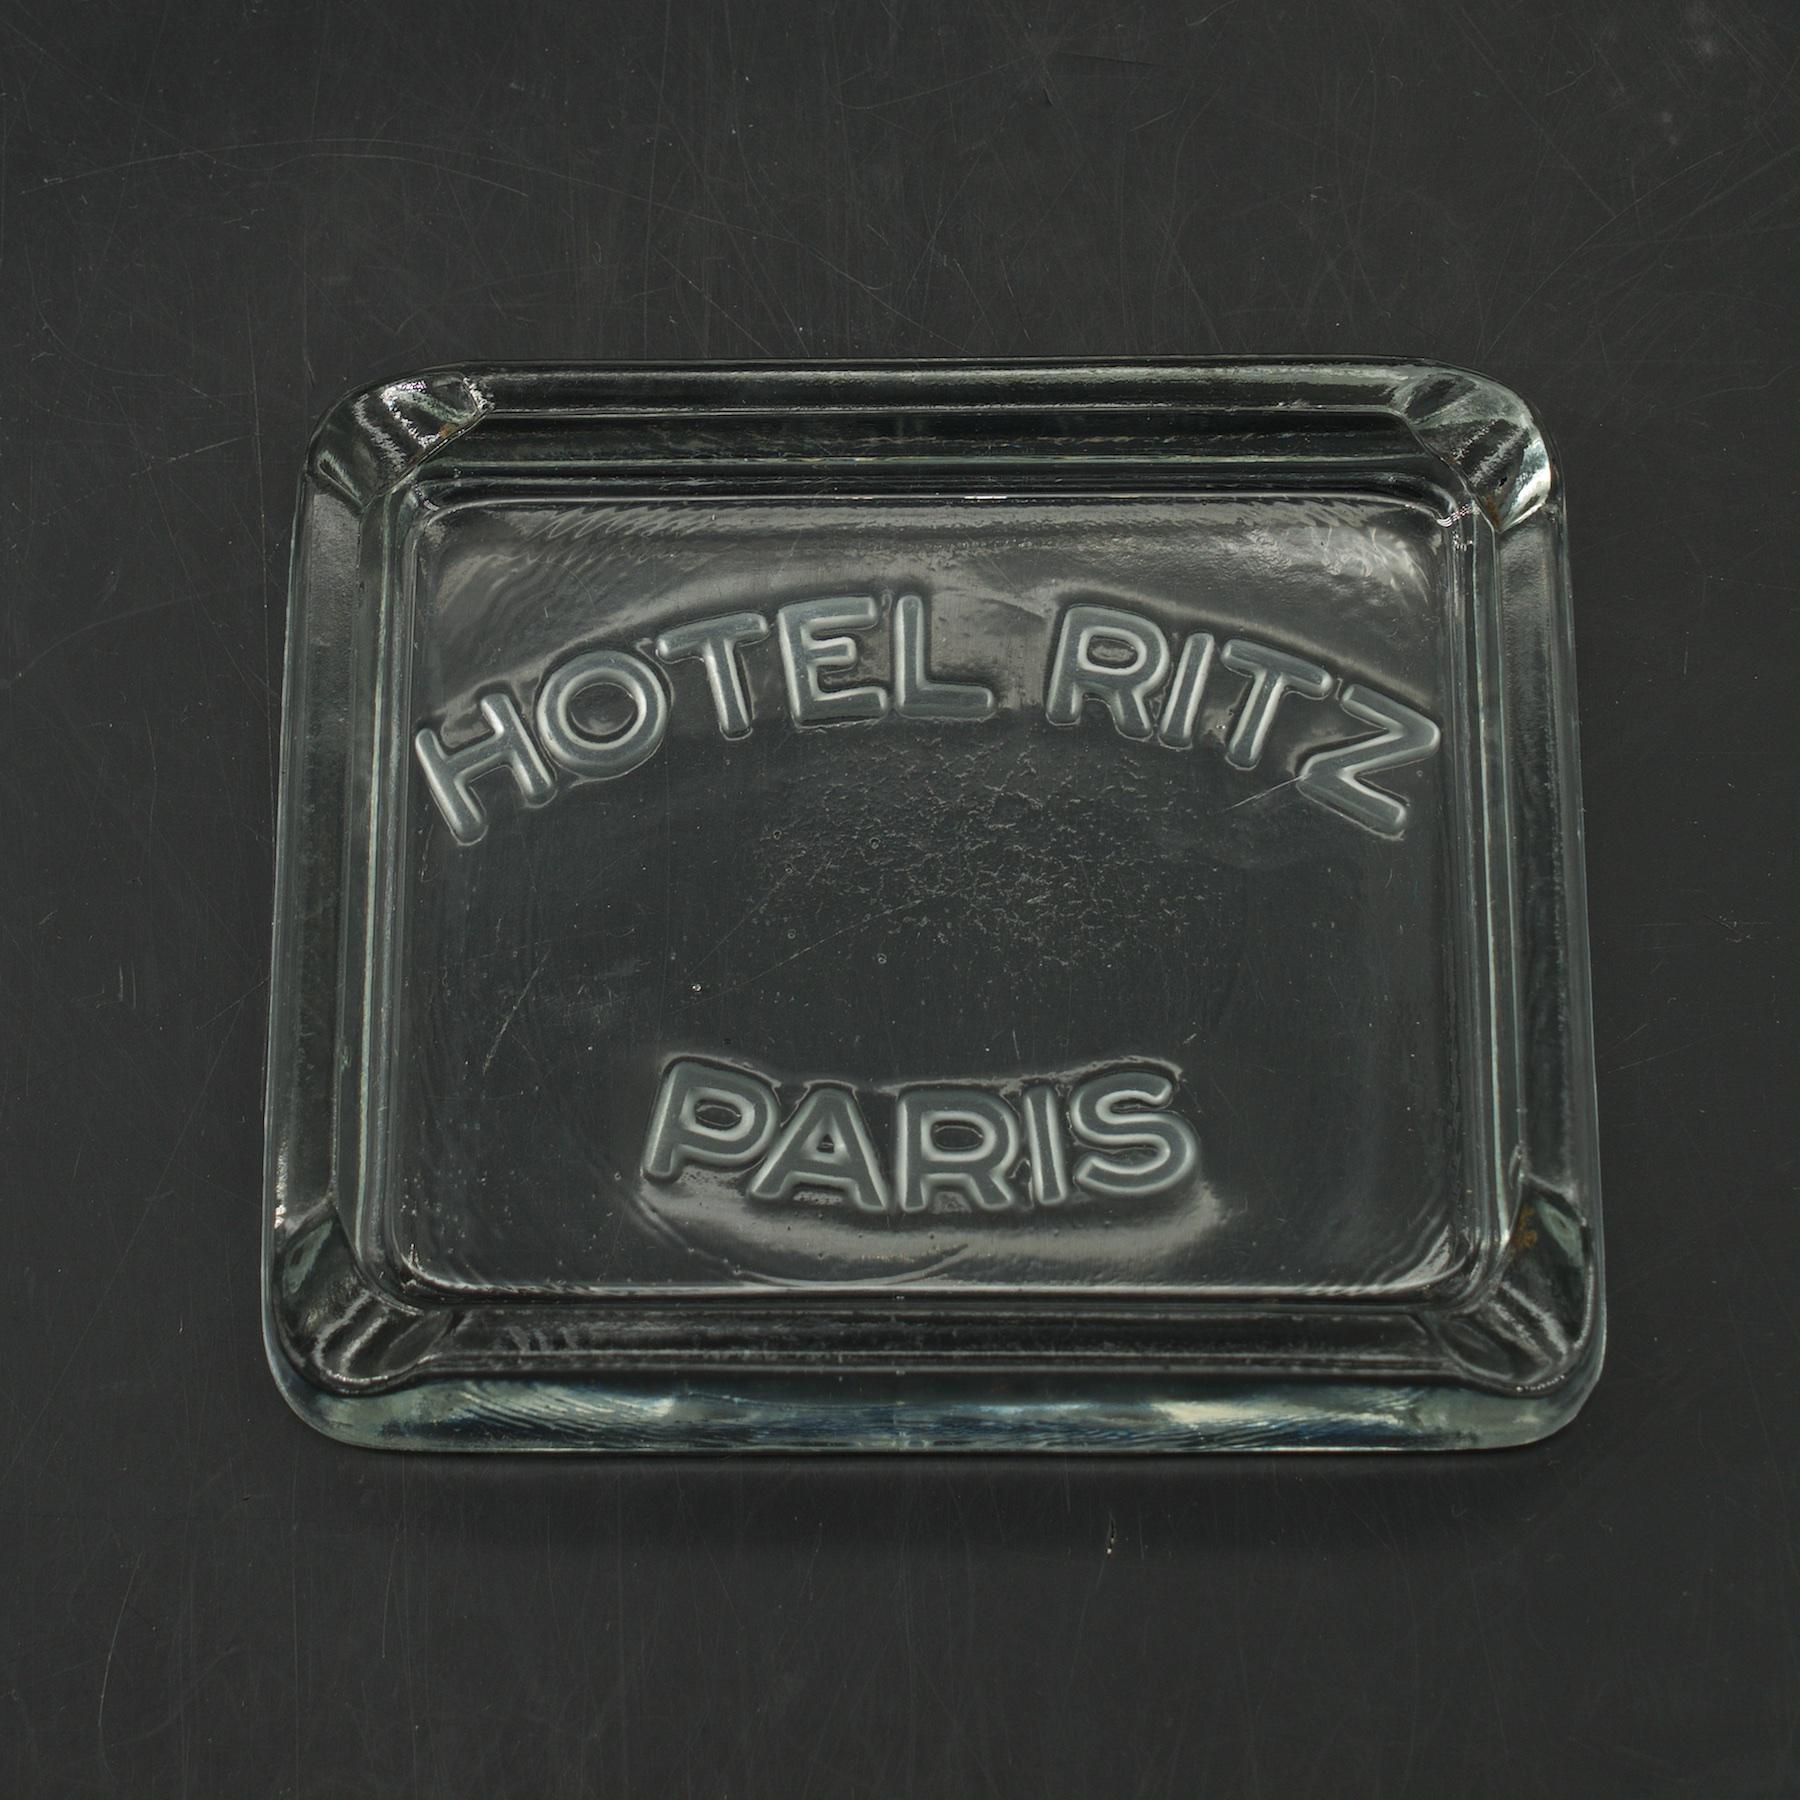 An Art Deco glass ashtray souvenir from the 1930s and 1940s Hotel Ritz, Paris. A chic table-top accessory that might imply you were at the world's best hotel over 50 years ago. Measures: W 4.13 x D 3.38 x H .75 in.

 